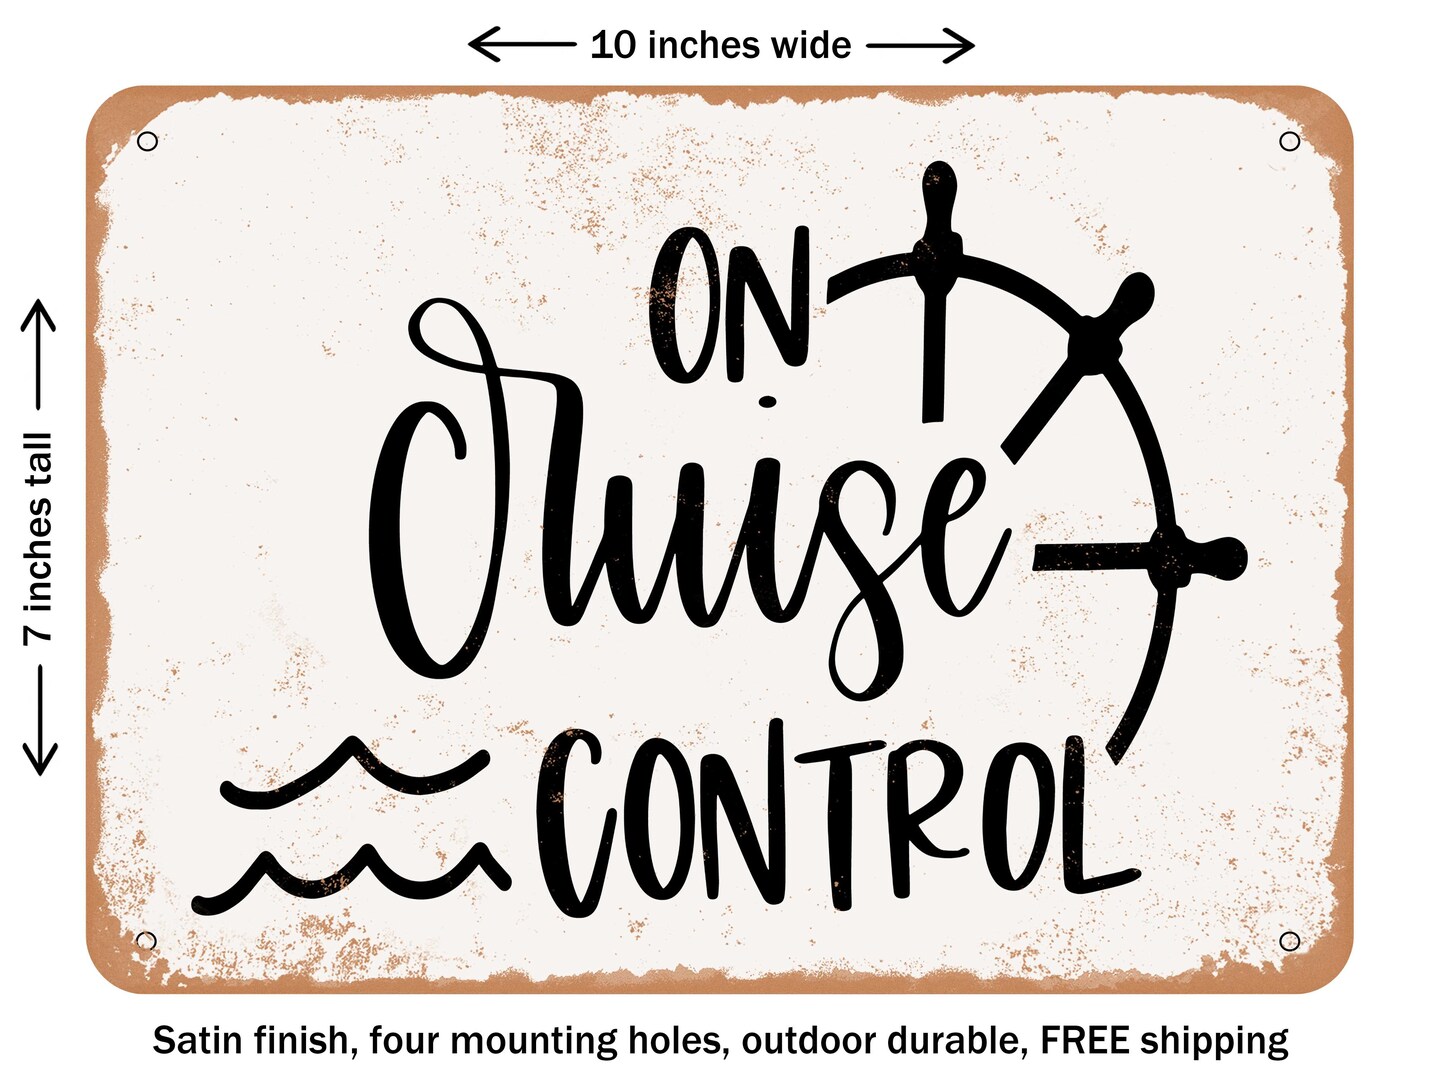 DECORATIVE METAL SIGN - On Cruise Control - 2 - Vintage Rusty Look